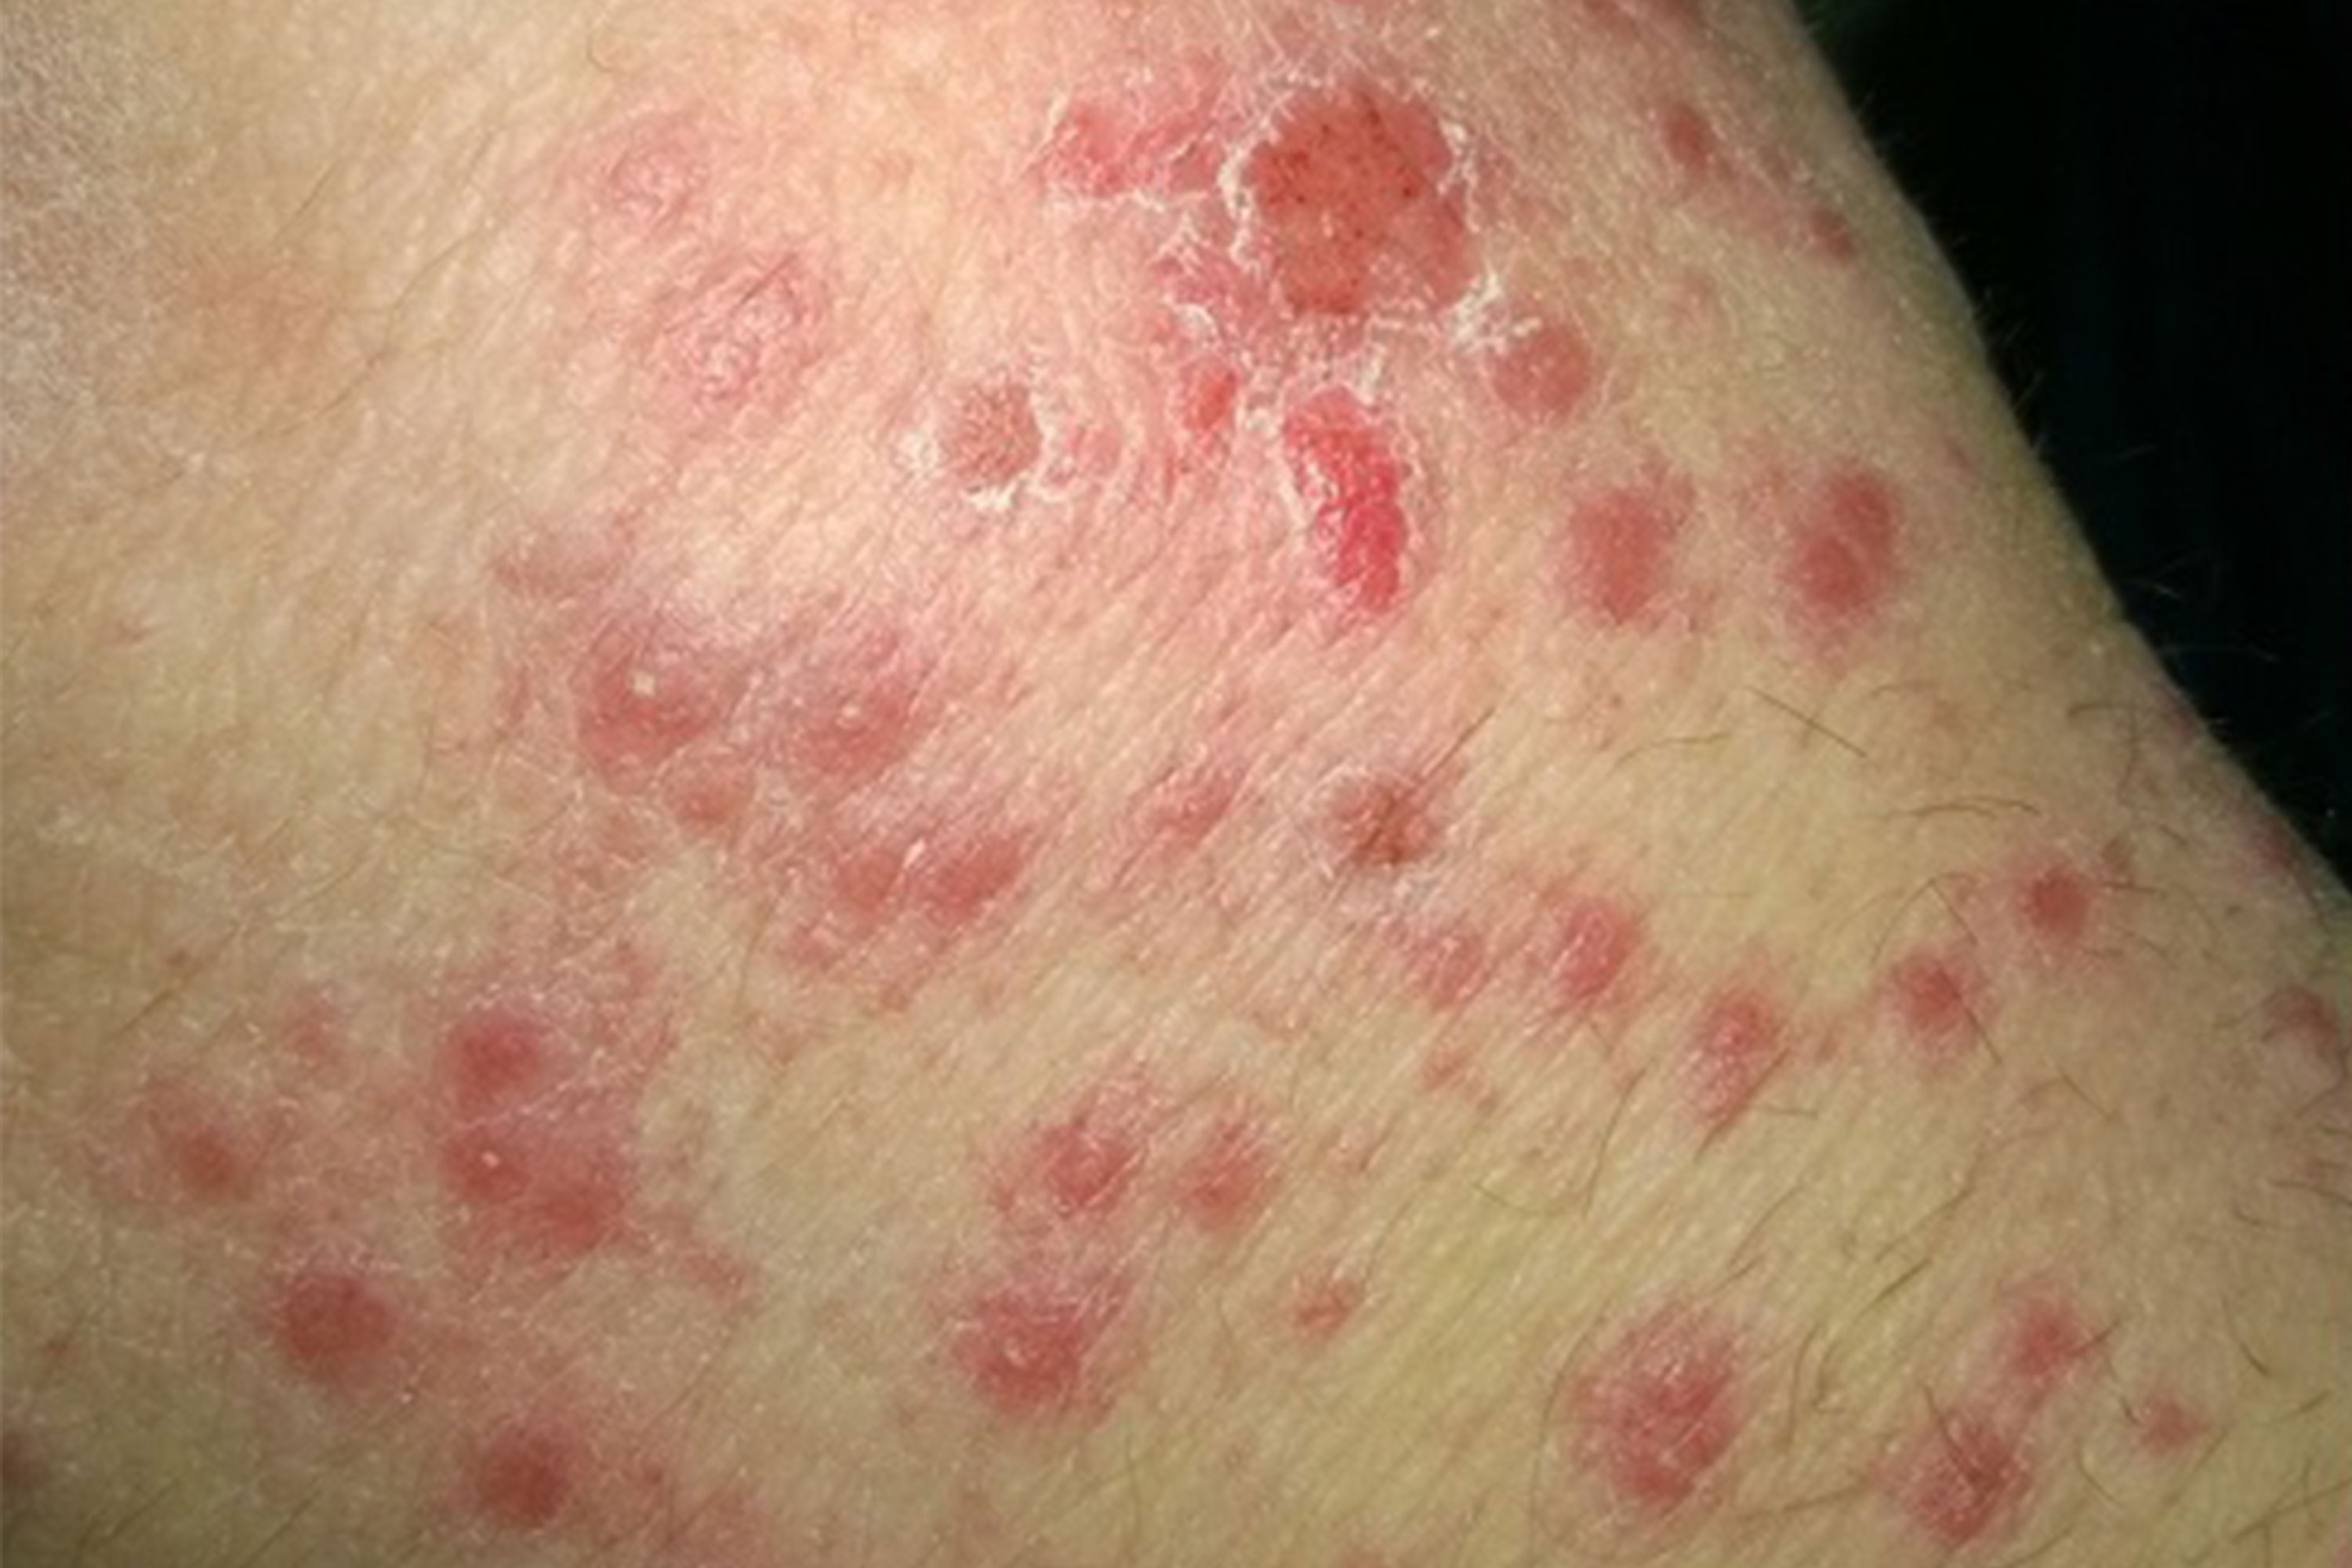 Plaque Psoriasis: What It Looks Like, Causes & Treatment